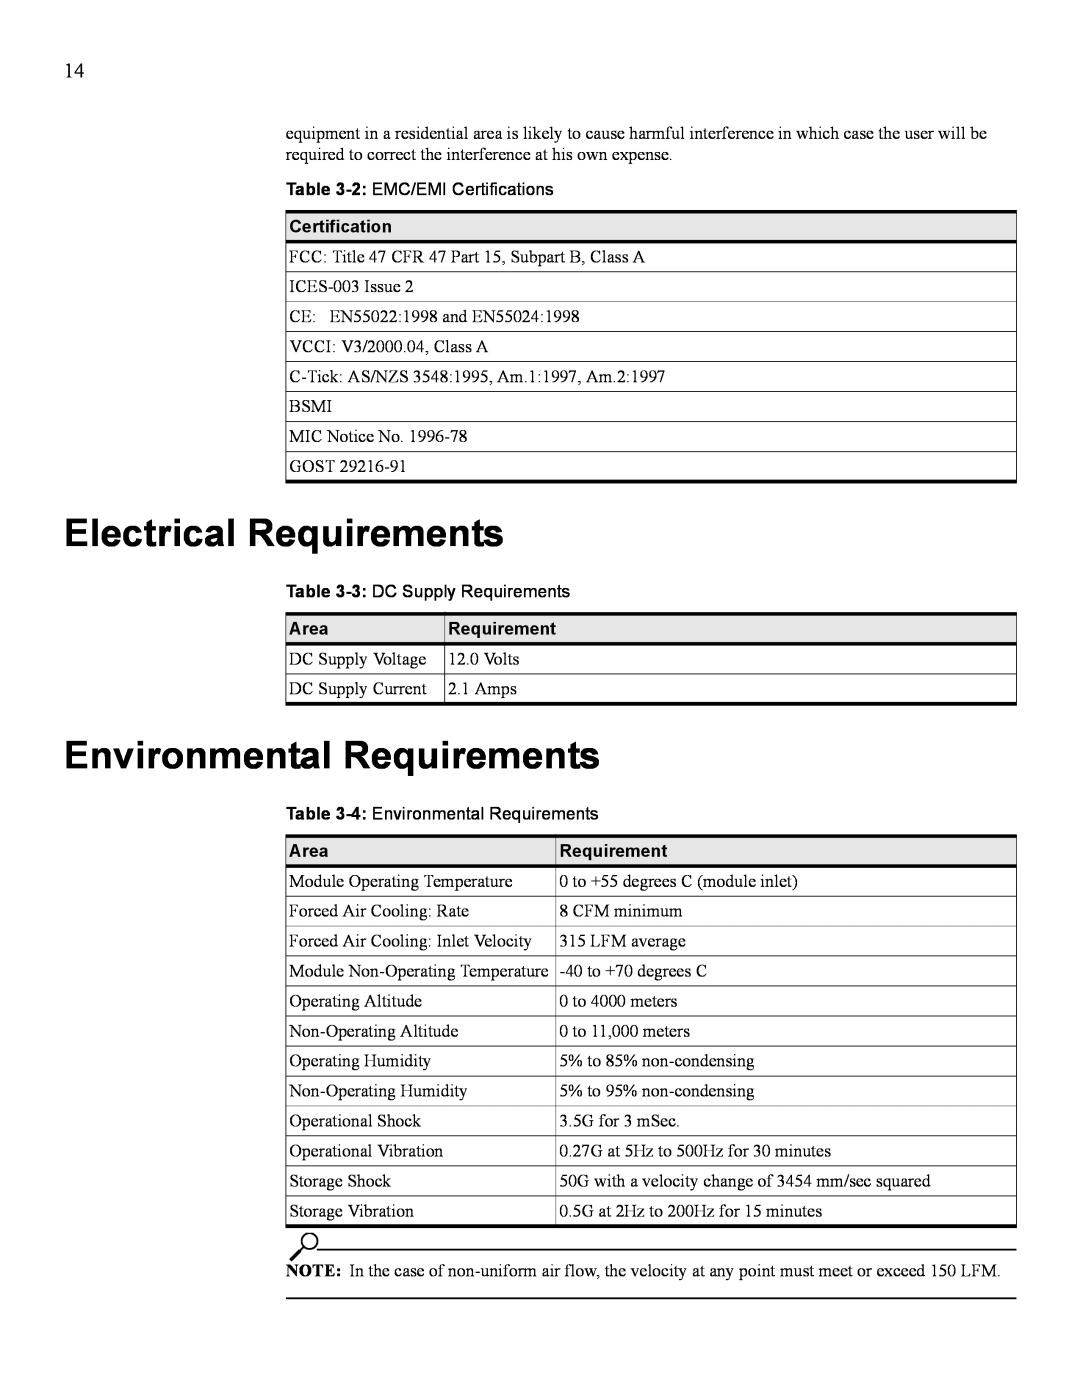 IBM 24R9718 IB manual Electrical Requirements, Environmental Requirements, Certification, Area 